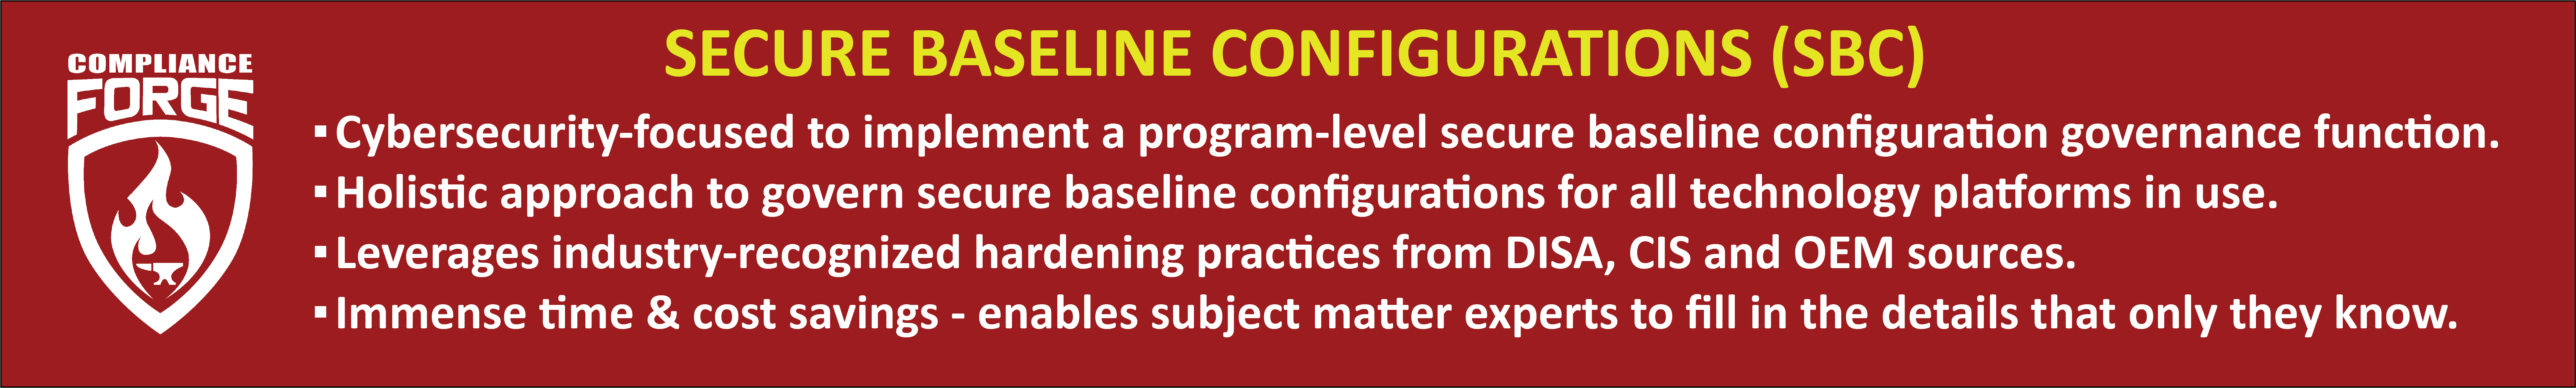 Secure Cybersecurity Baseline Configurations